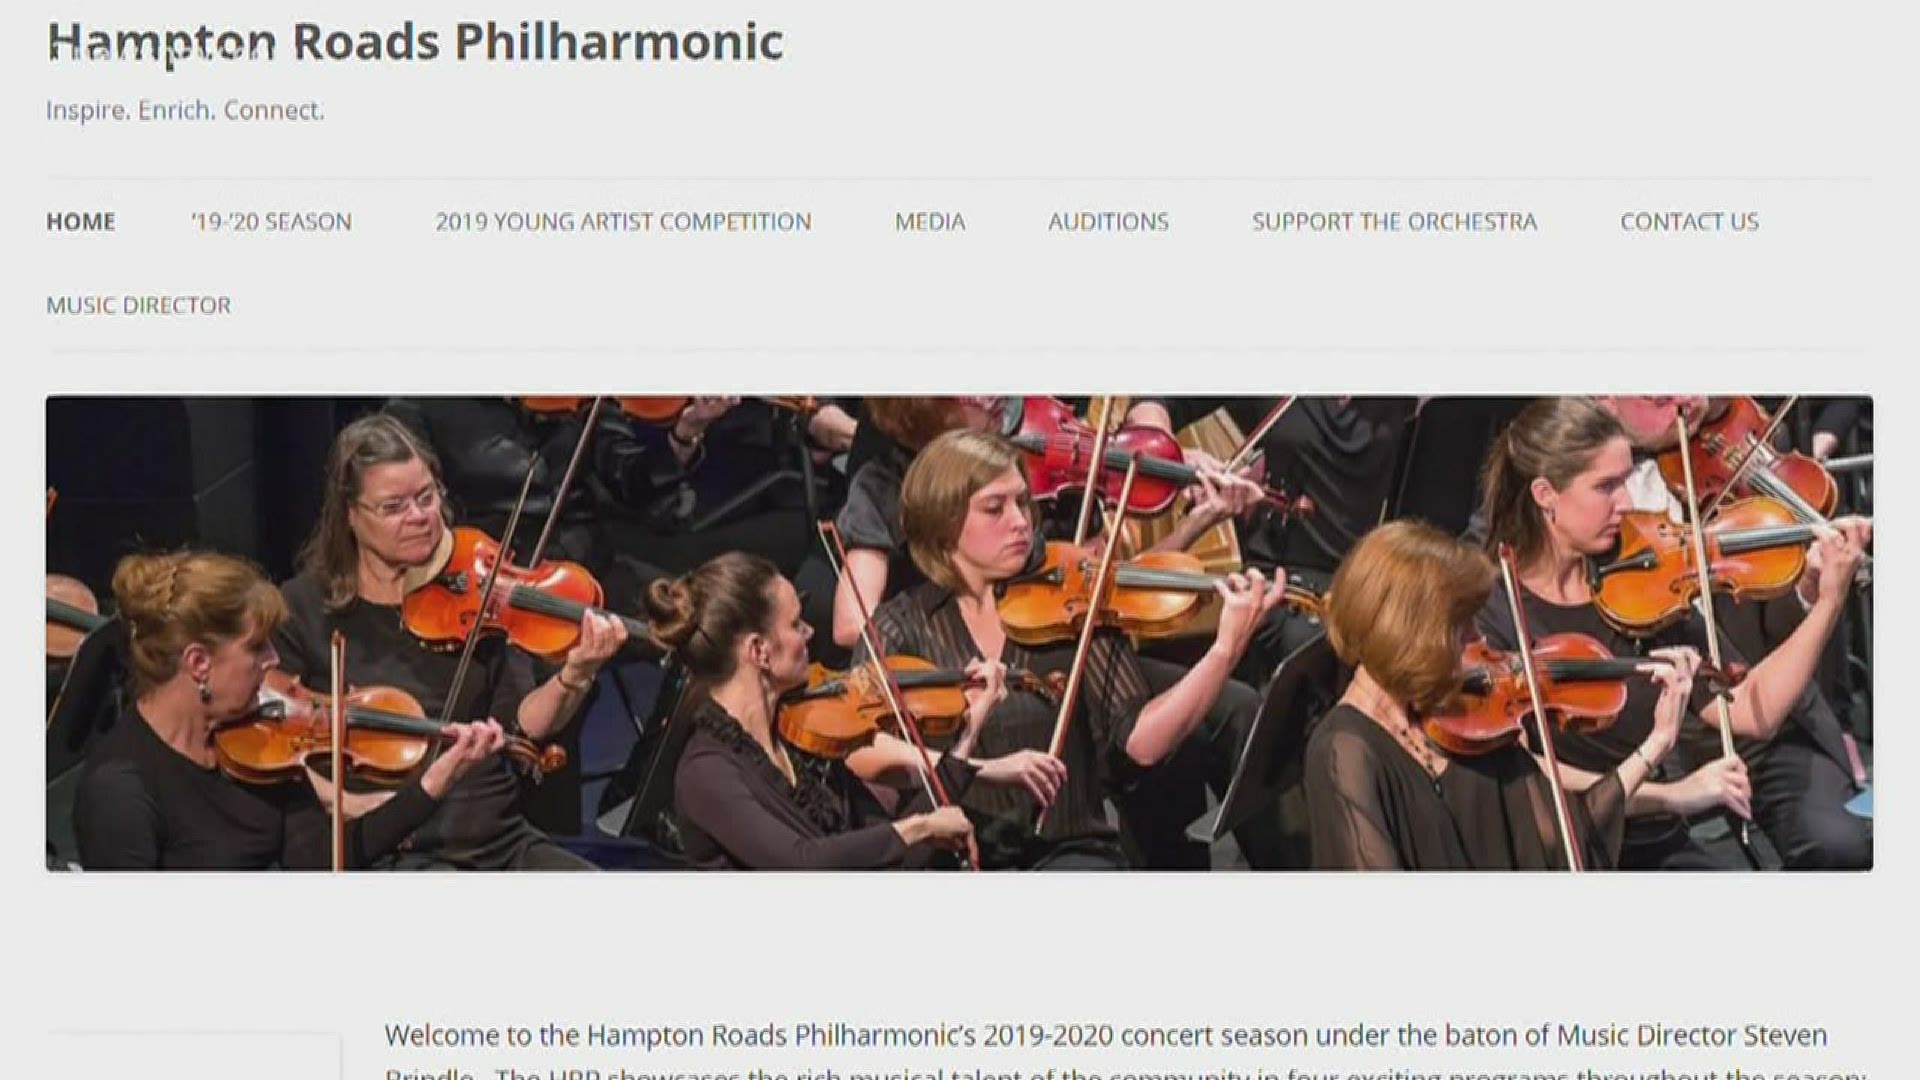 MAKING A MARK: Hampton Roads Philharmonic keeping people connected through music